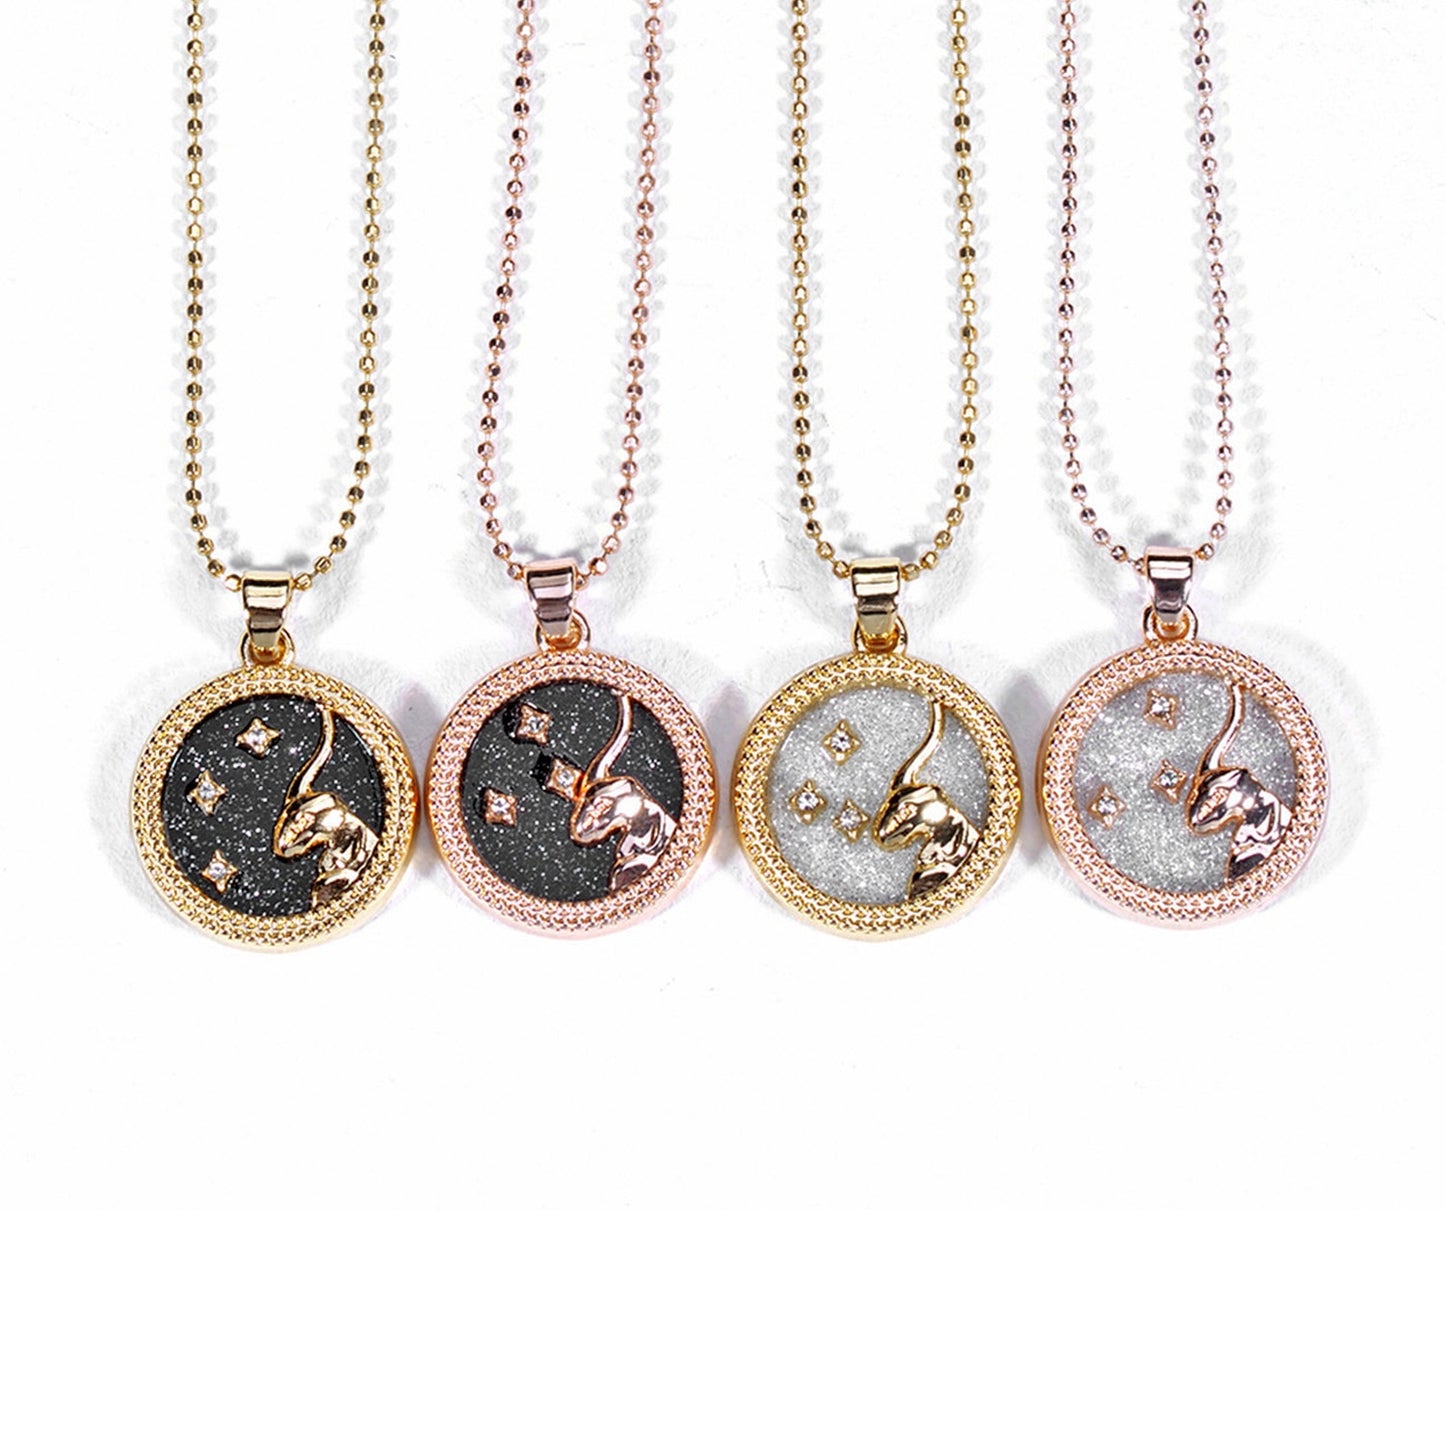 Fashion 12 Constellation Necklace For Women 2 PCS/Set Zodiac Sign Coin Chain Pendant Choker Birthday Couple Jewelry Charm Gifts